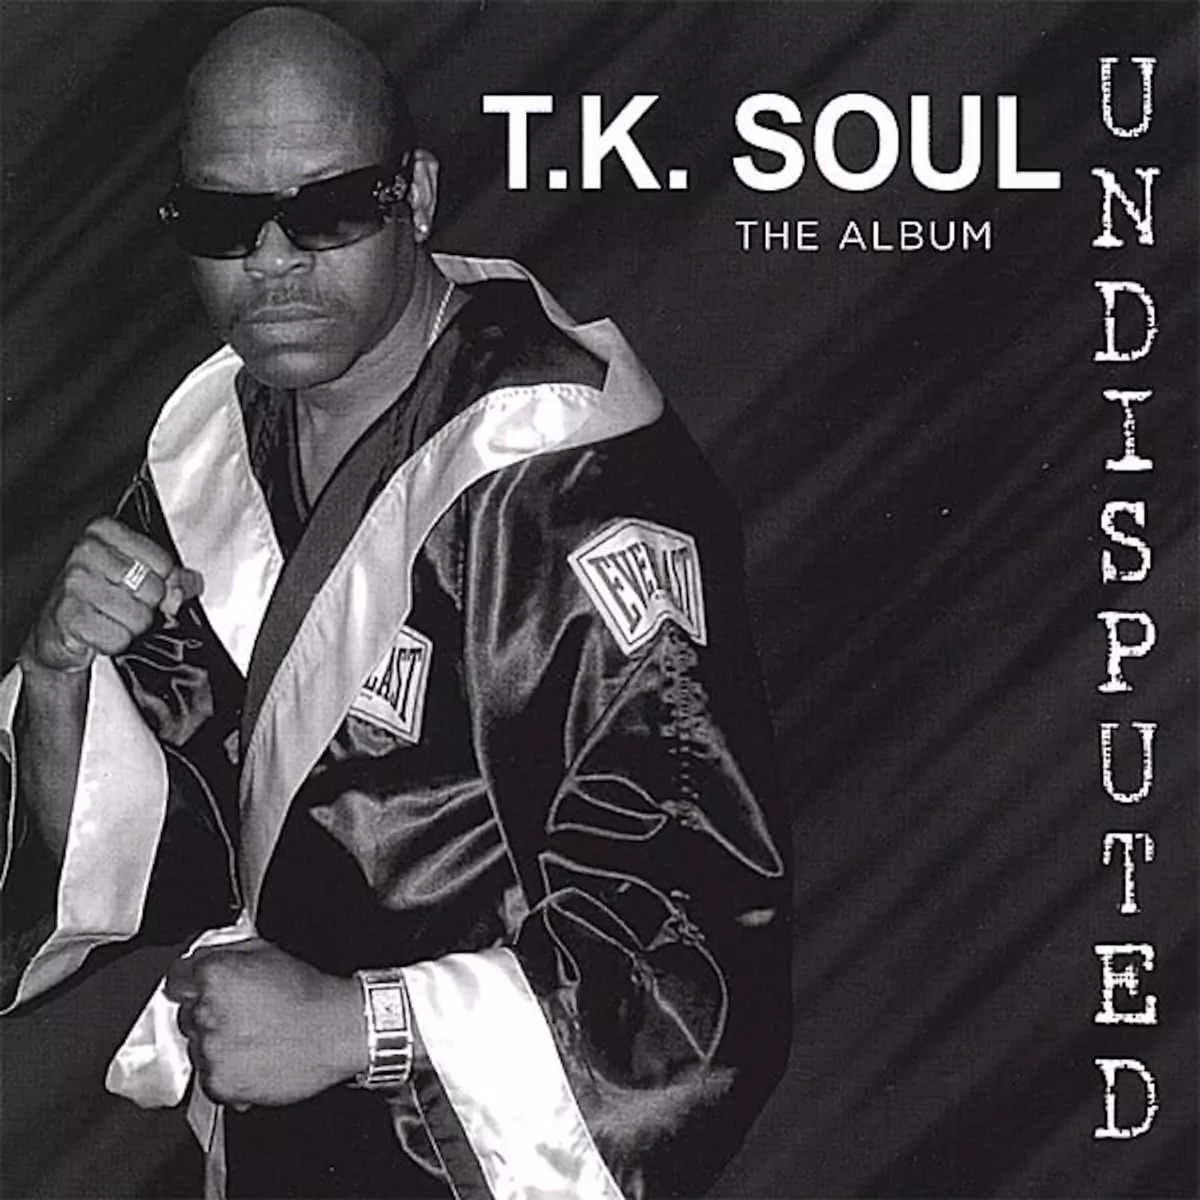 Undisputed the Album (His Latest) by T.K. Soul on Apple Music